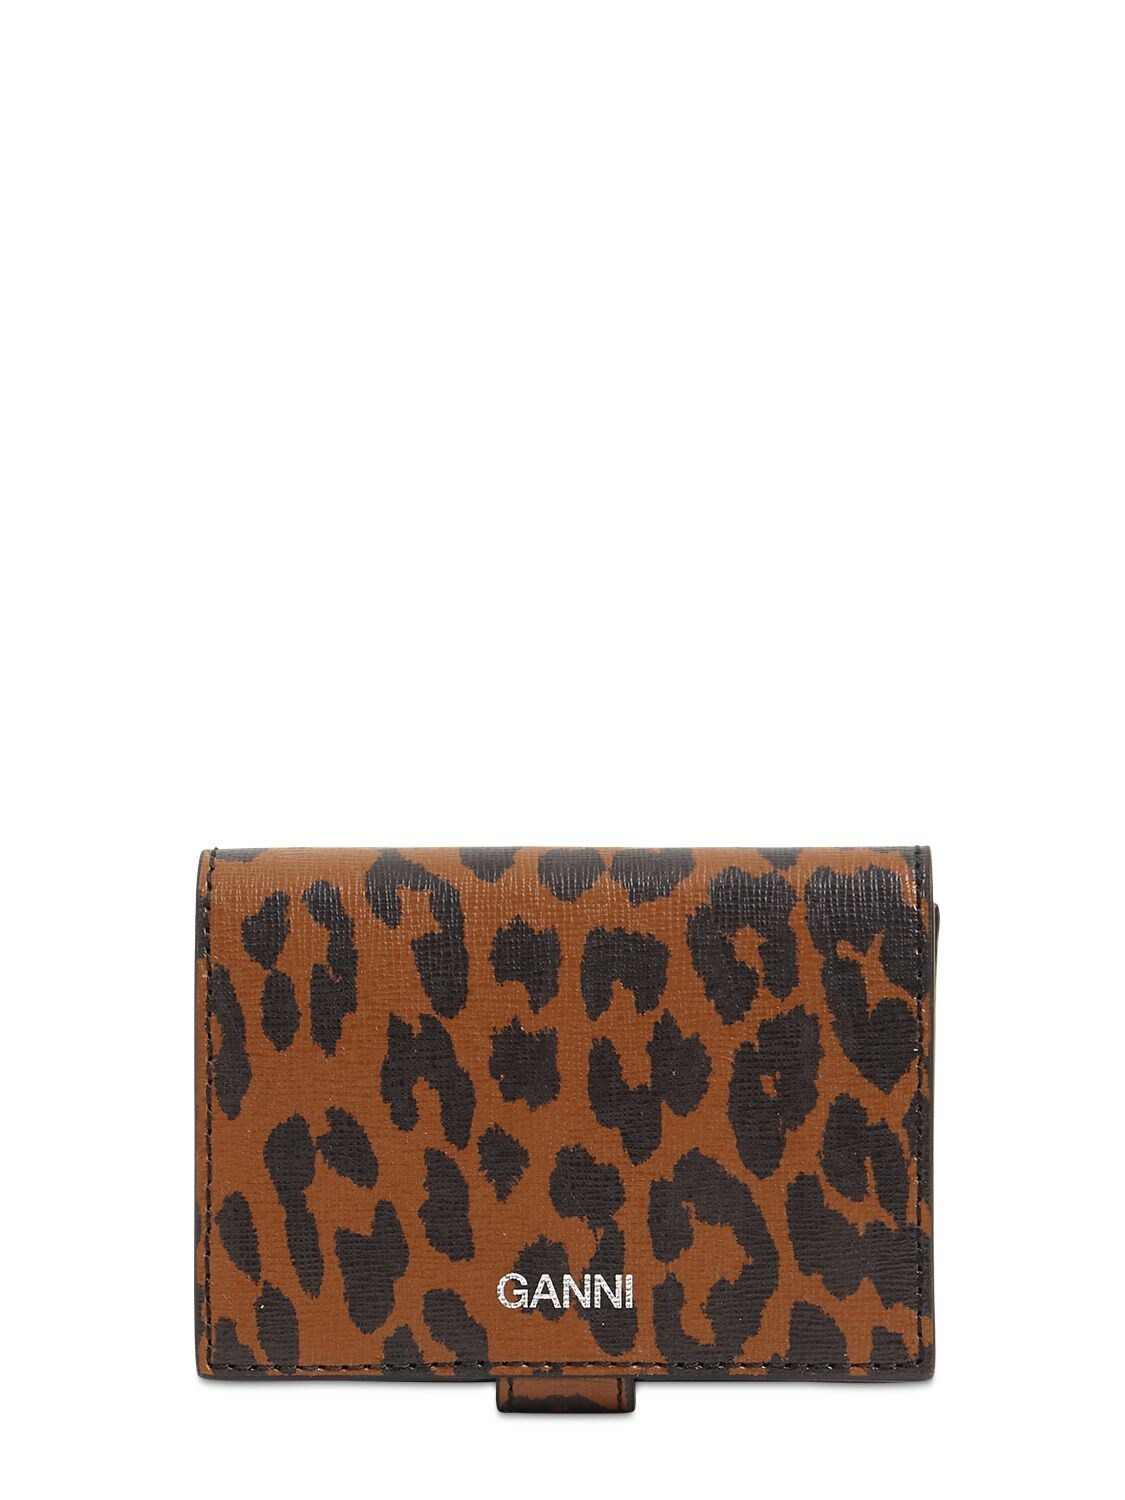 GANNI PRINTED LEATHER COMPACT WALLET,72IJ5W016-ODK20